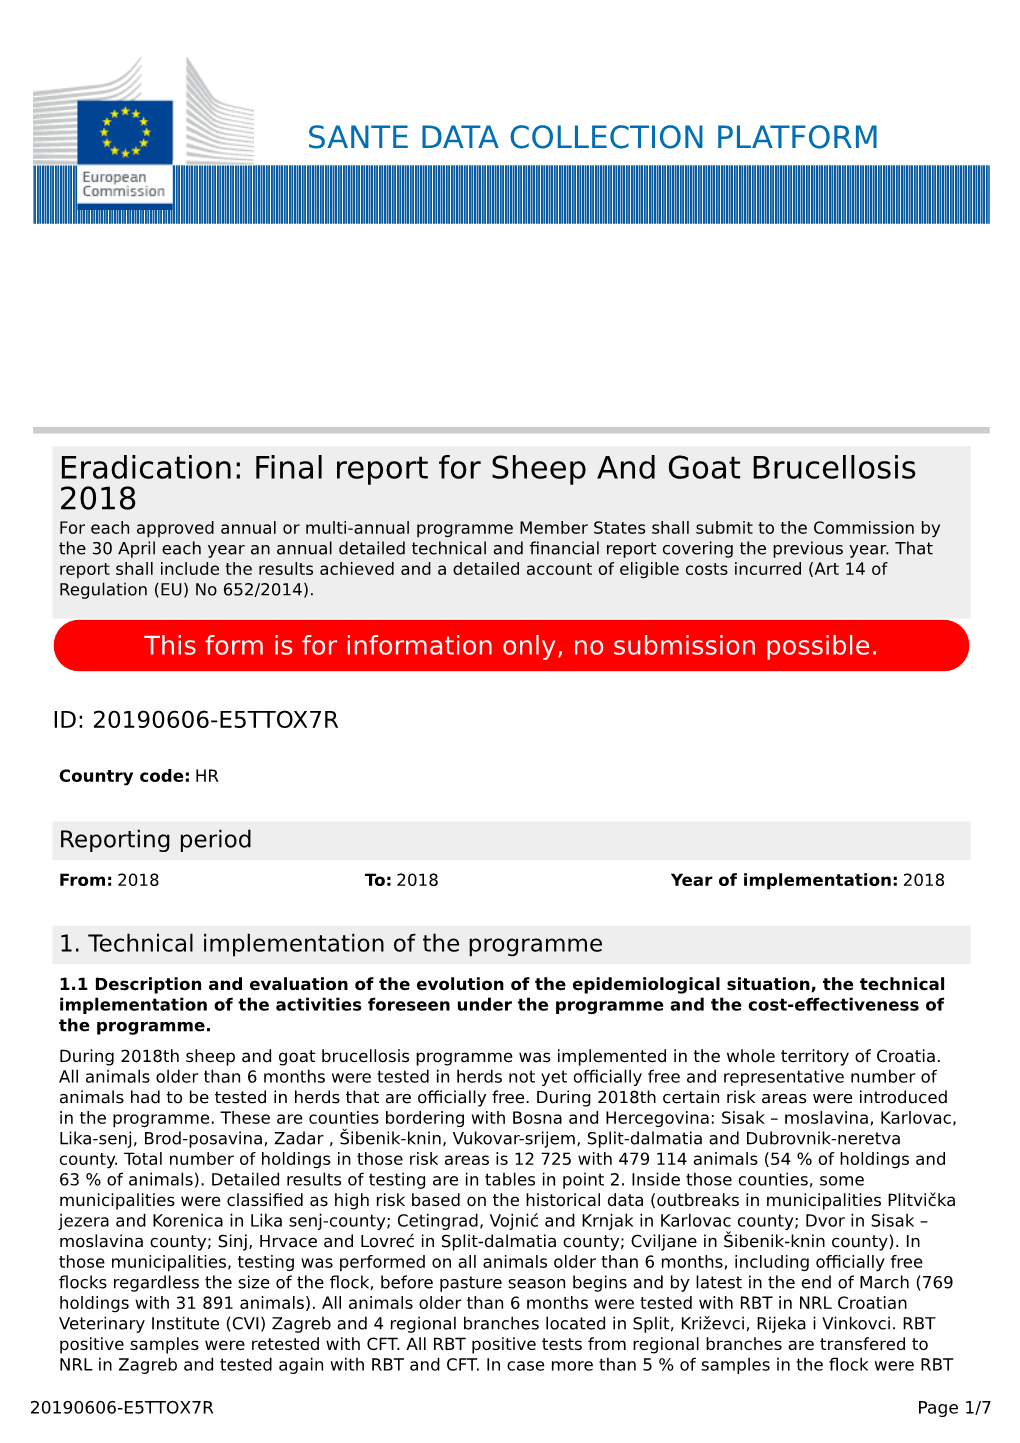 Final Report for Sheep and Goat Brucellosis 2018